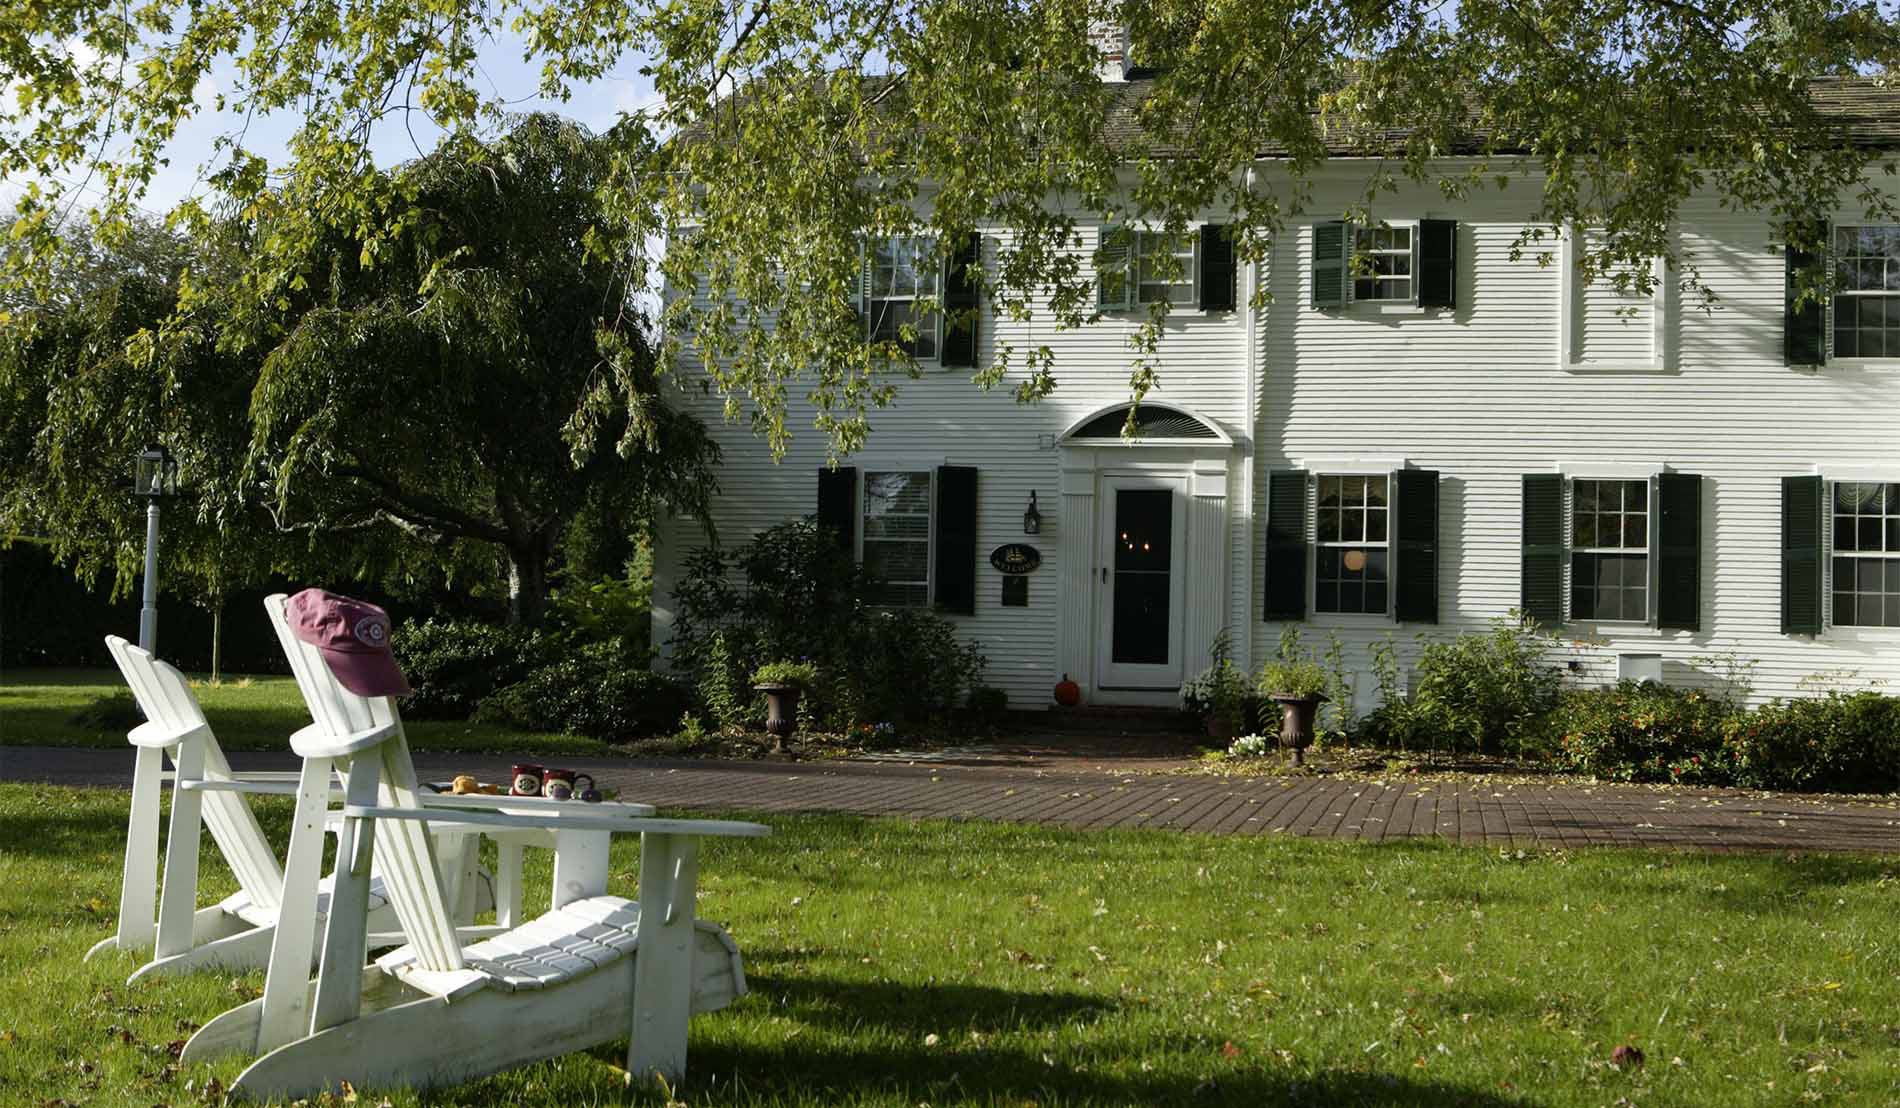 Two white Adirondack chairs sitting in the grassy lawn in front of the two-story white sided Inn